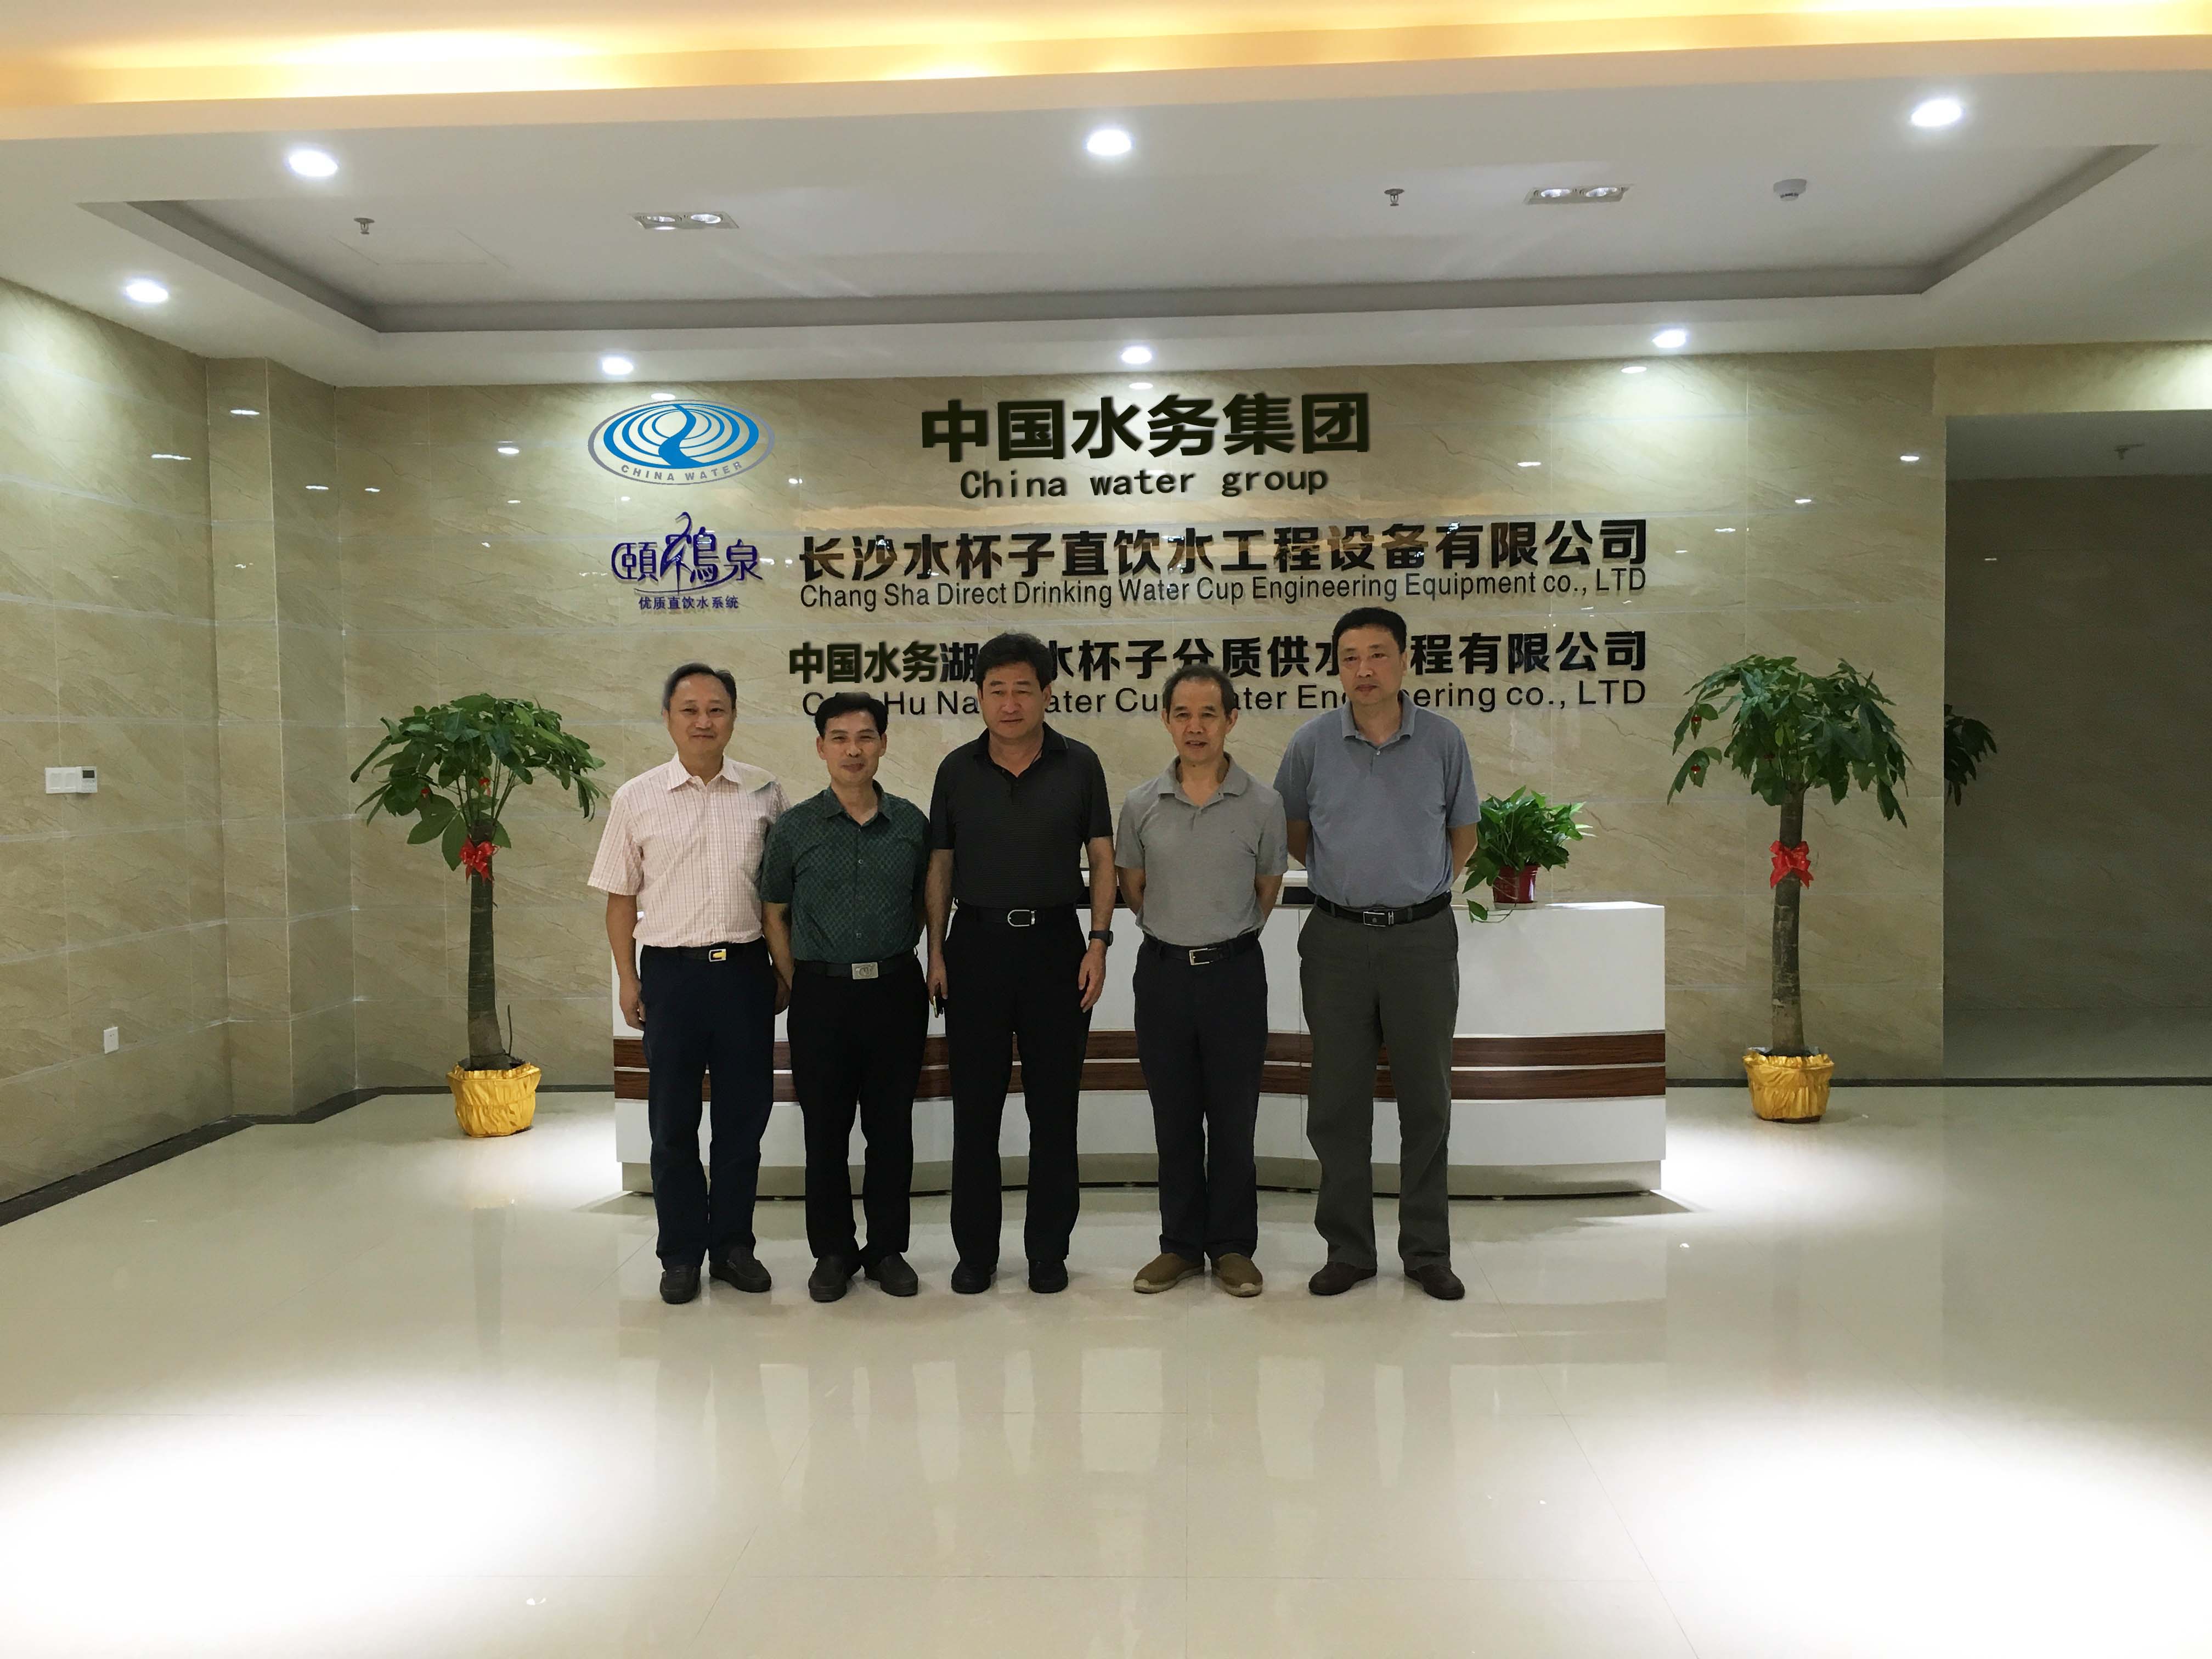 Chinese educational equipment experts visit the company for inspection